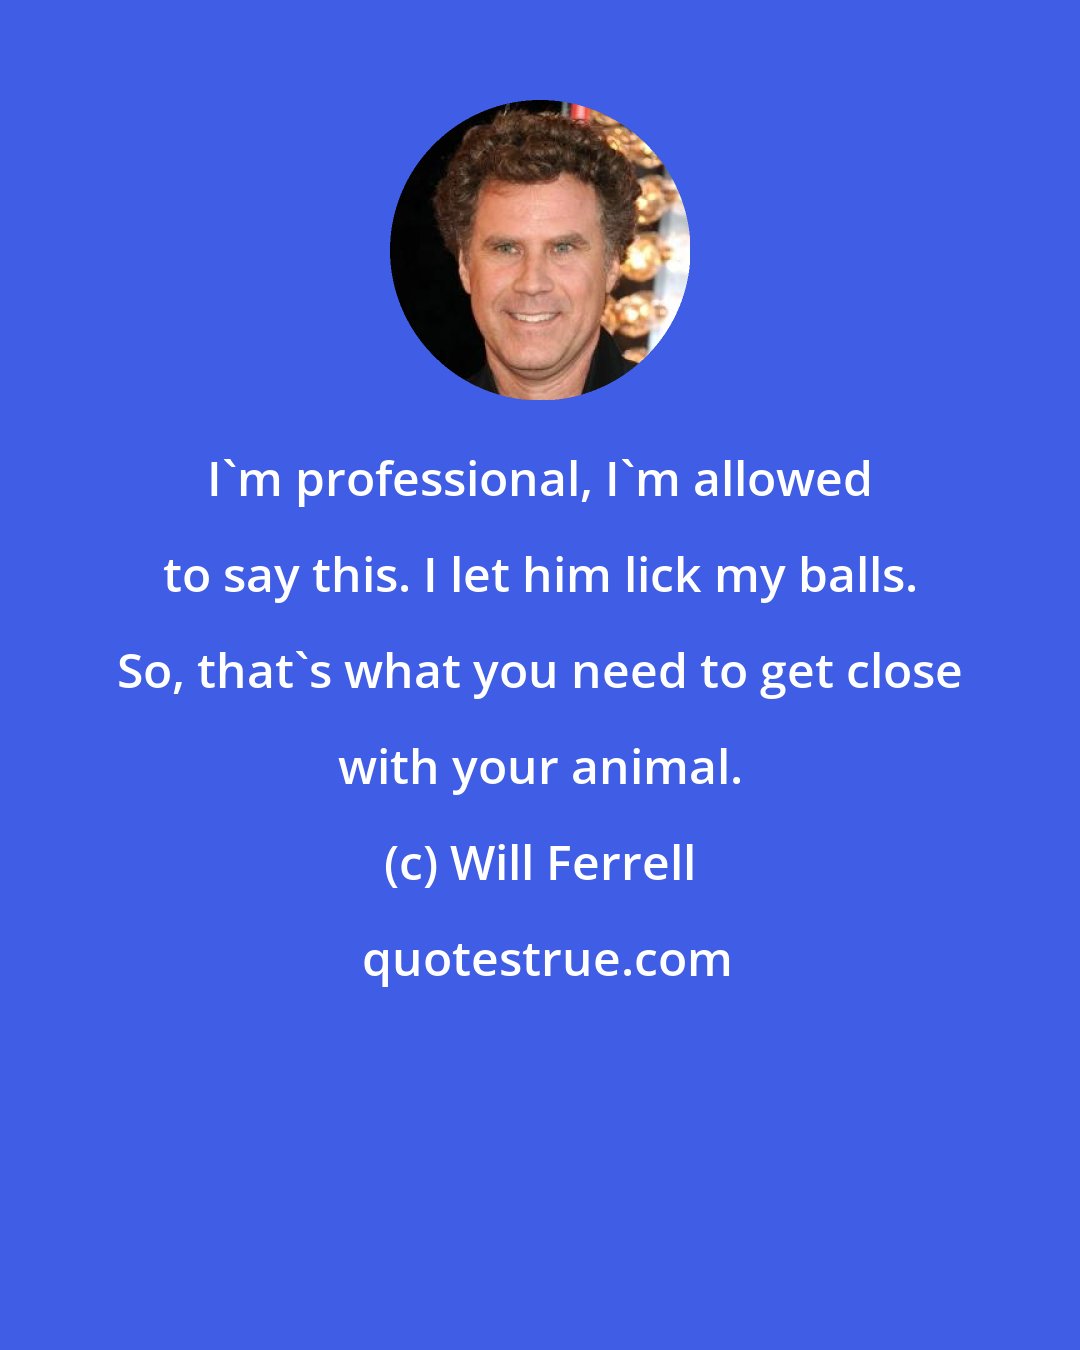 Will Ferrell: I'm professional, I'm allowed to say this. I let him lick my balls. So, that's what you need to get close with your animal.